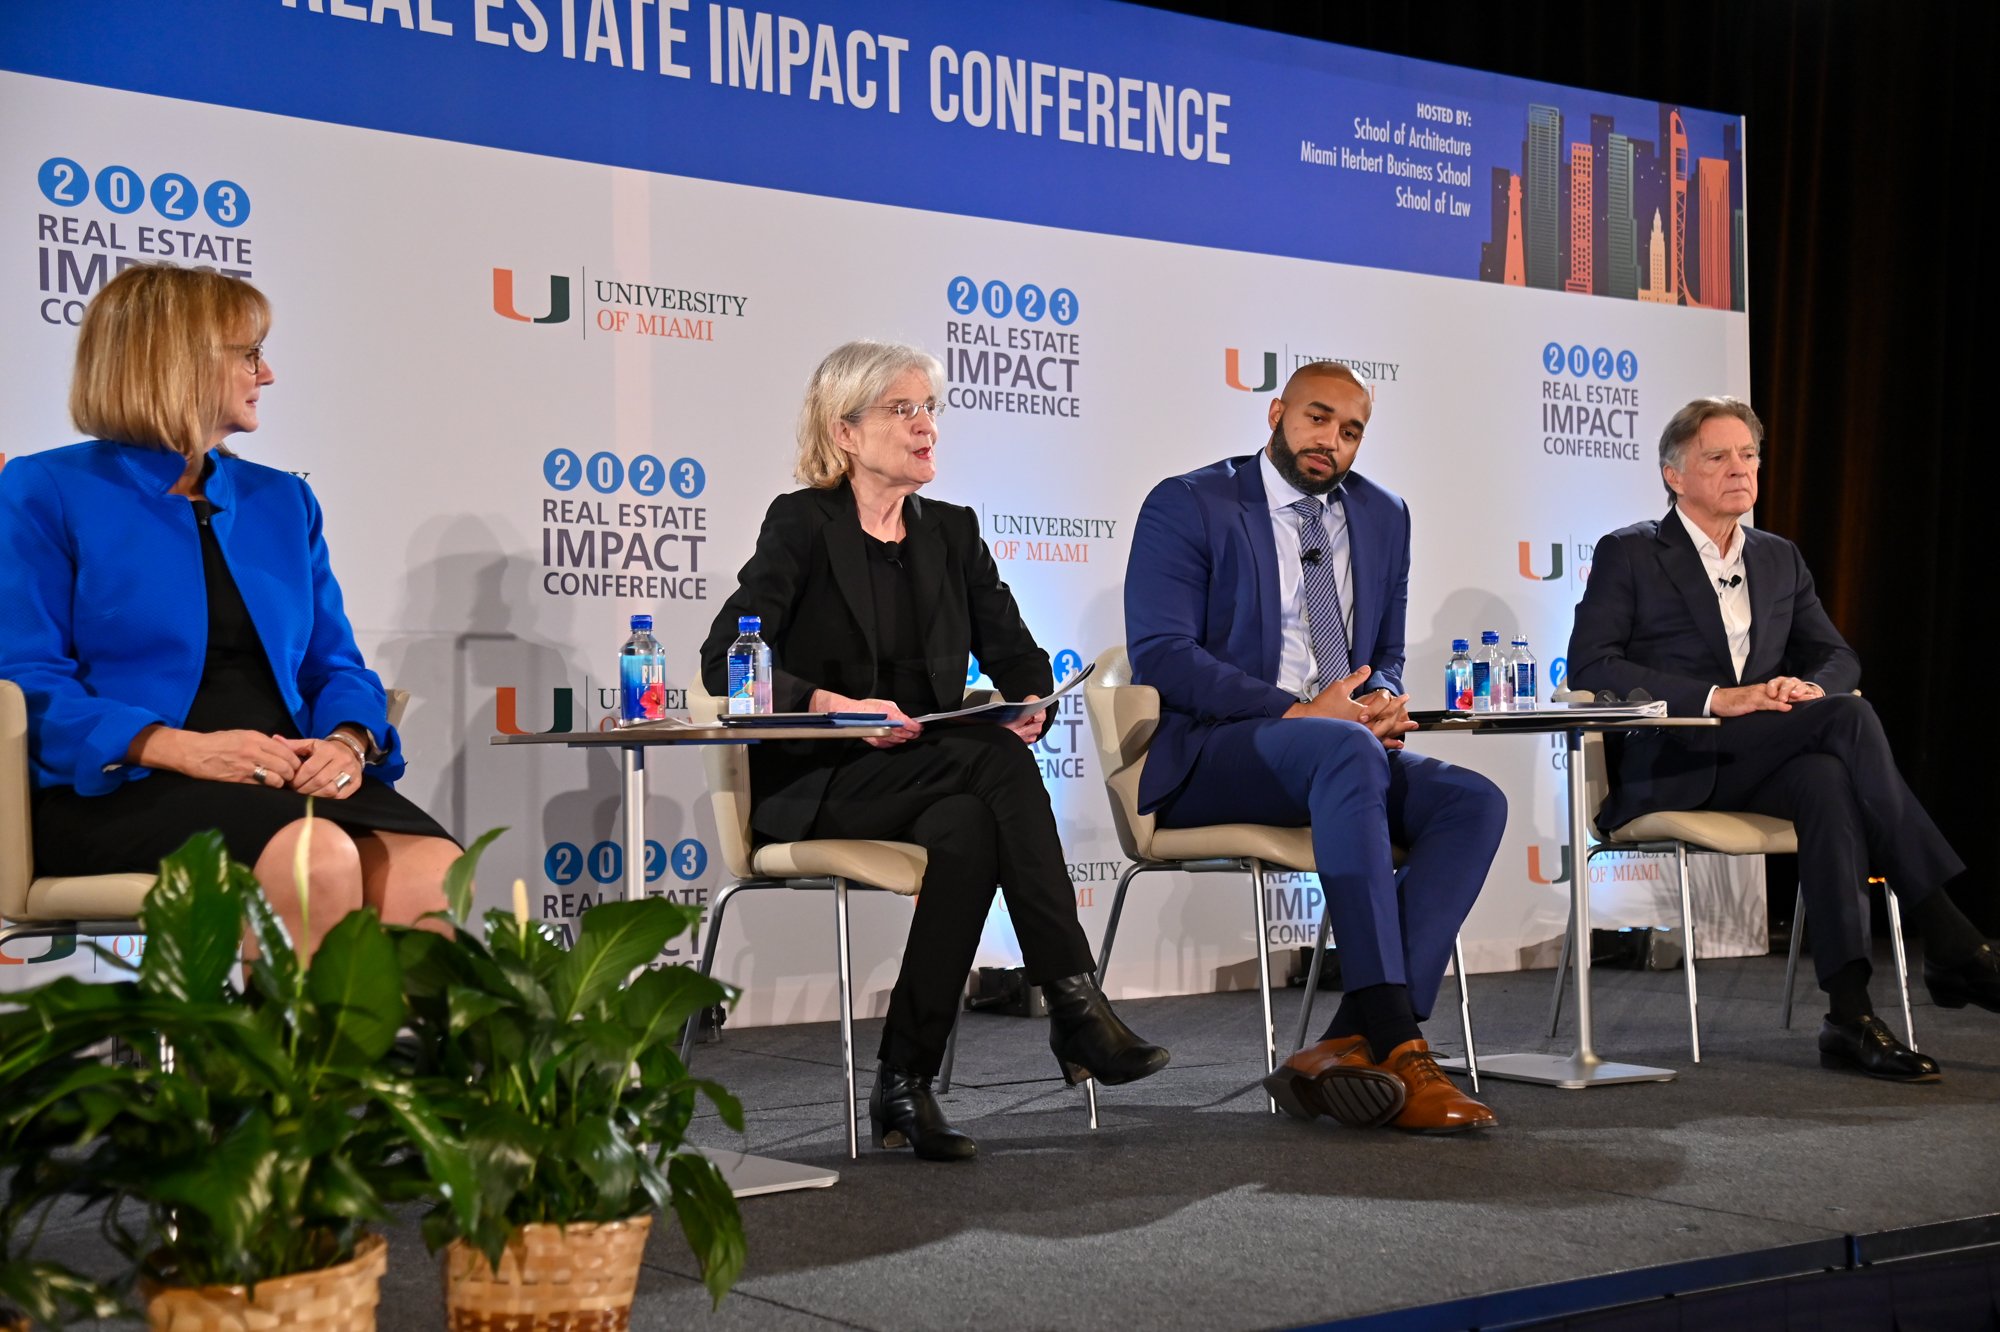 University of Miami Real Estate Impact Conference 2023 The Largest Edition Yet As Real Estate Leaders Discuss The State of Miami Real Estate 375.jpg